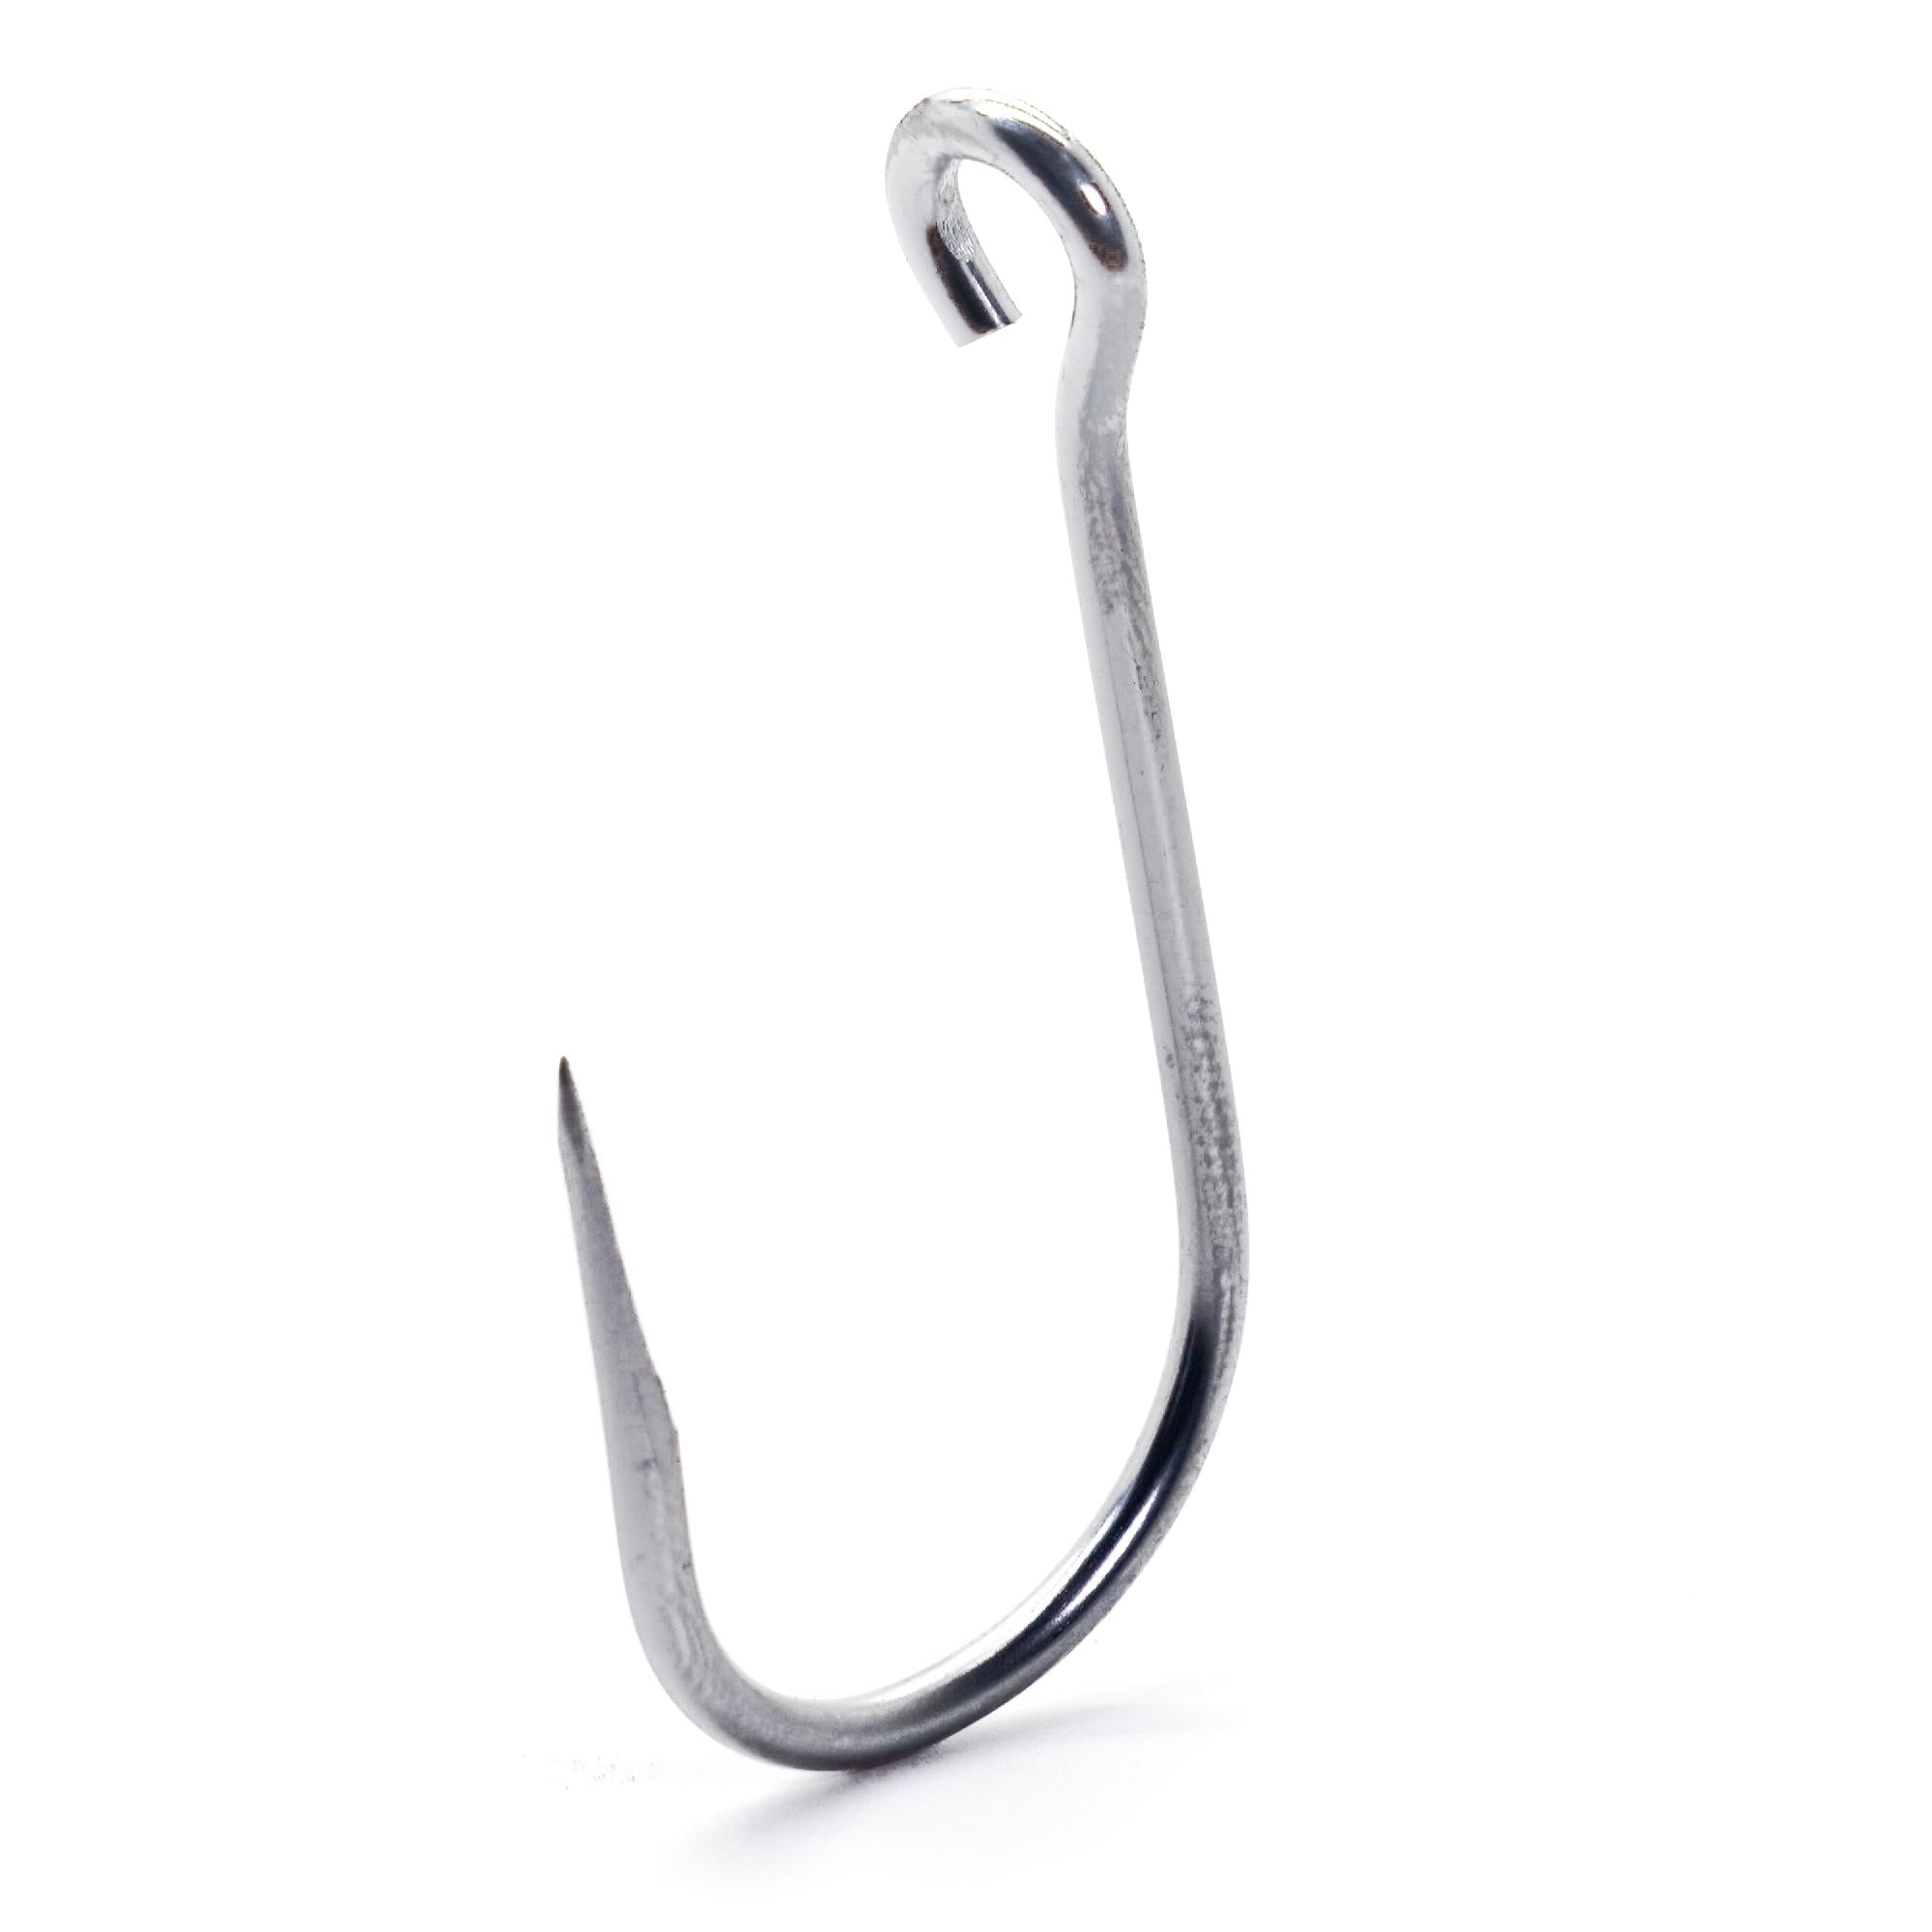 Barbless Salmon Siwash Hook - 3X Strong